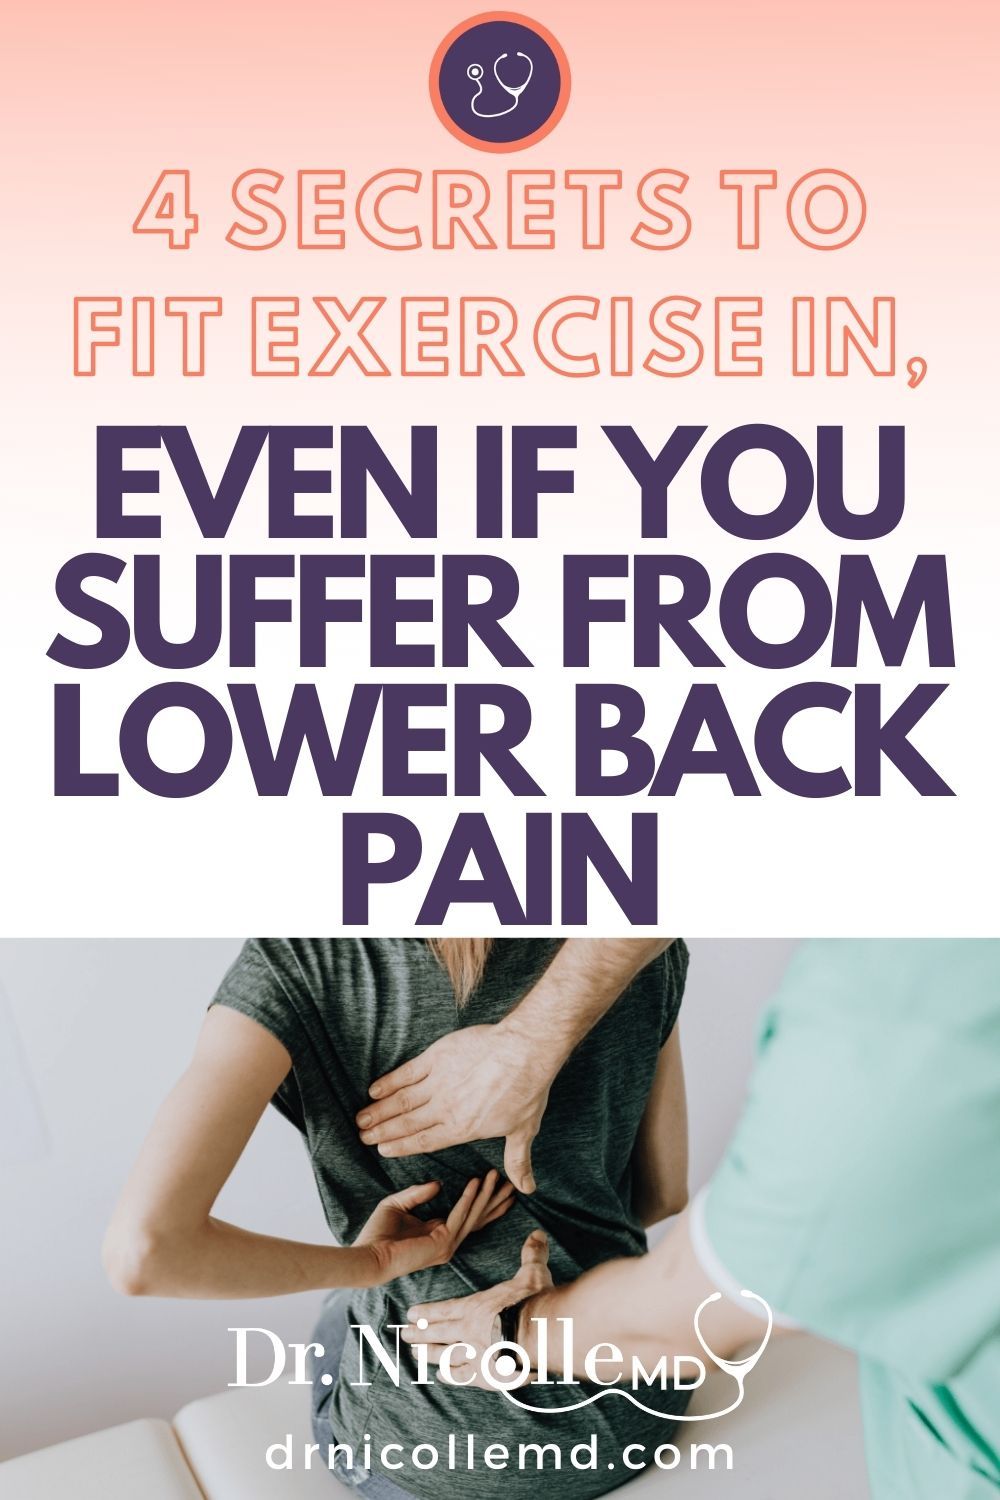 4 Secrets to Fit Exercise In, Even if You Suffer From Lower Back Pain